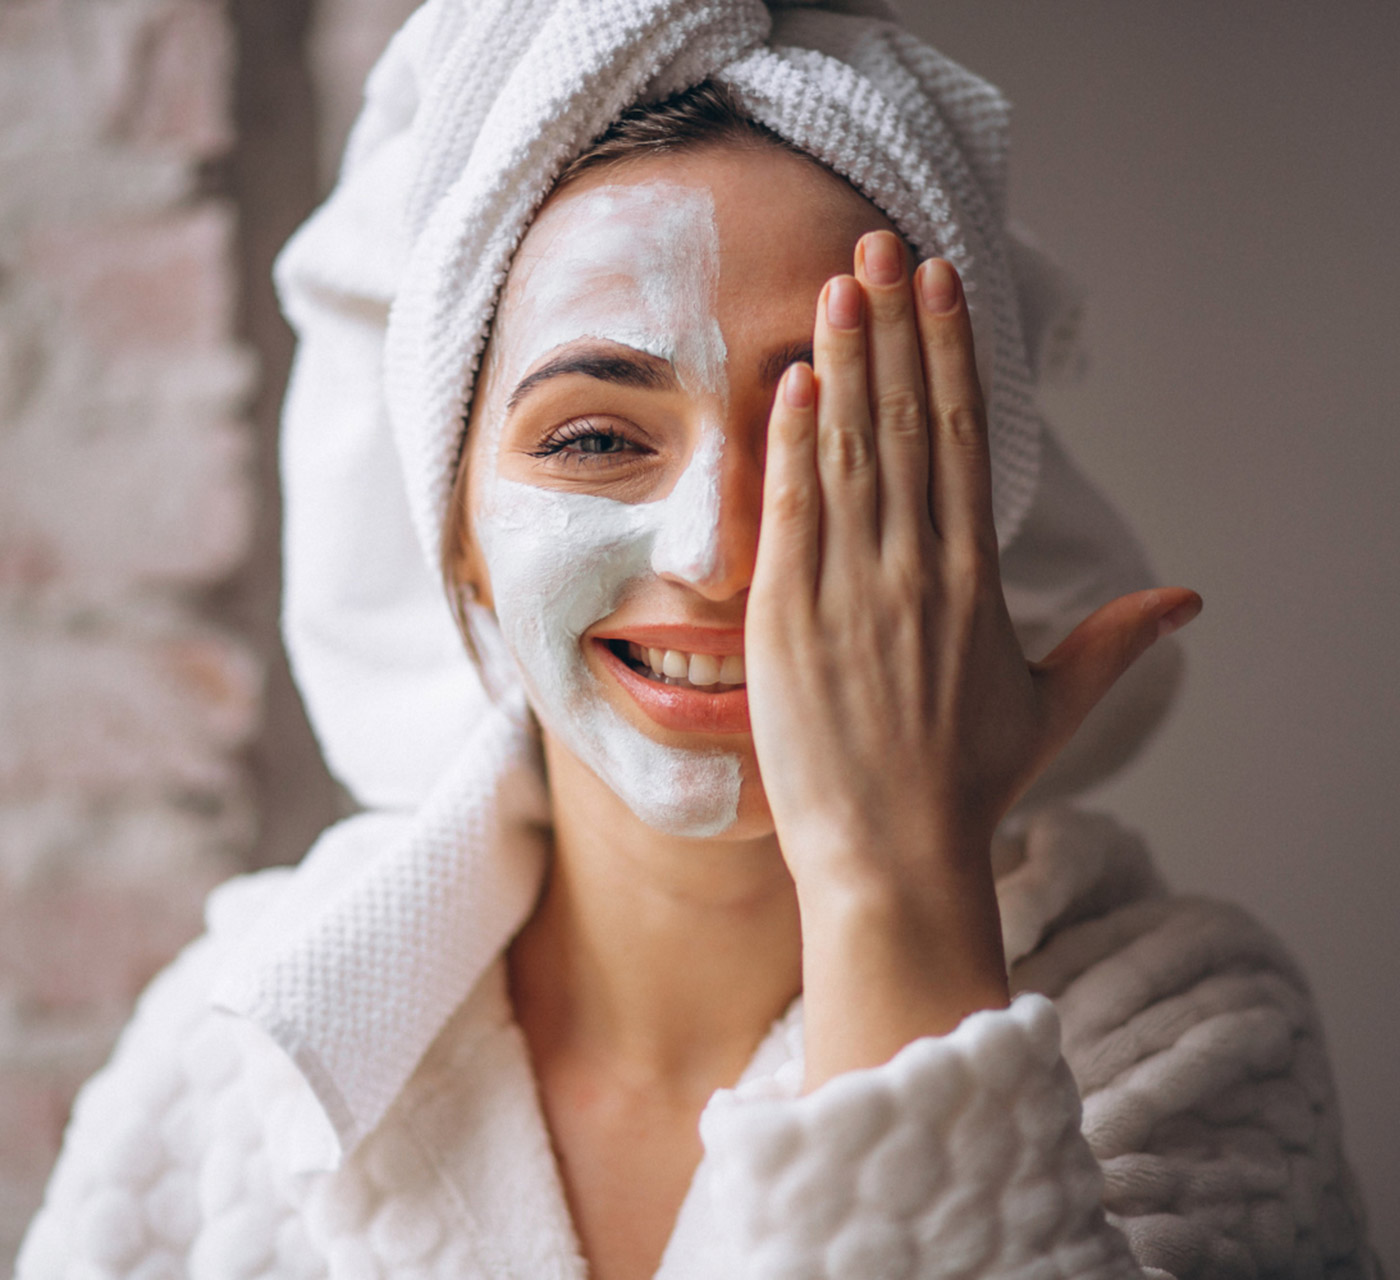 How To Achieve Naturally Glowing Skin With Homemade Face Masks